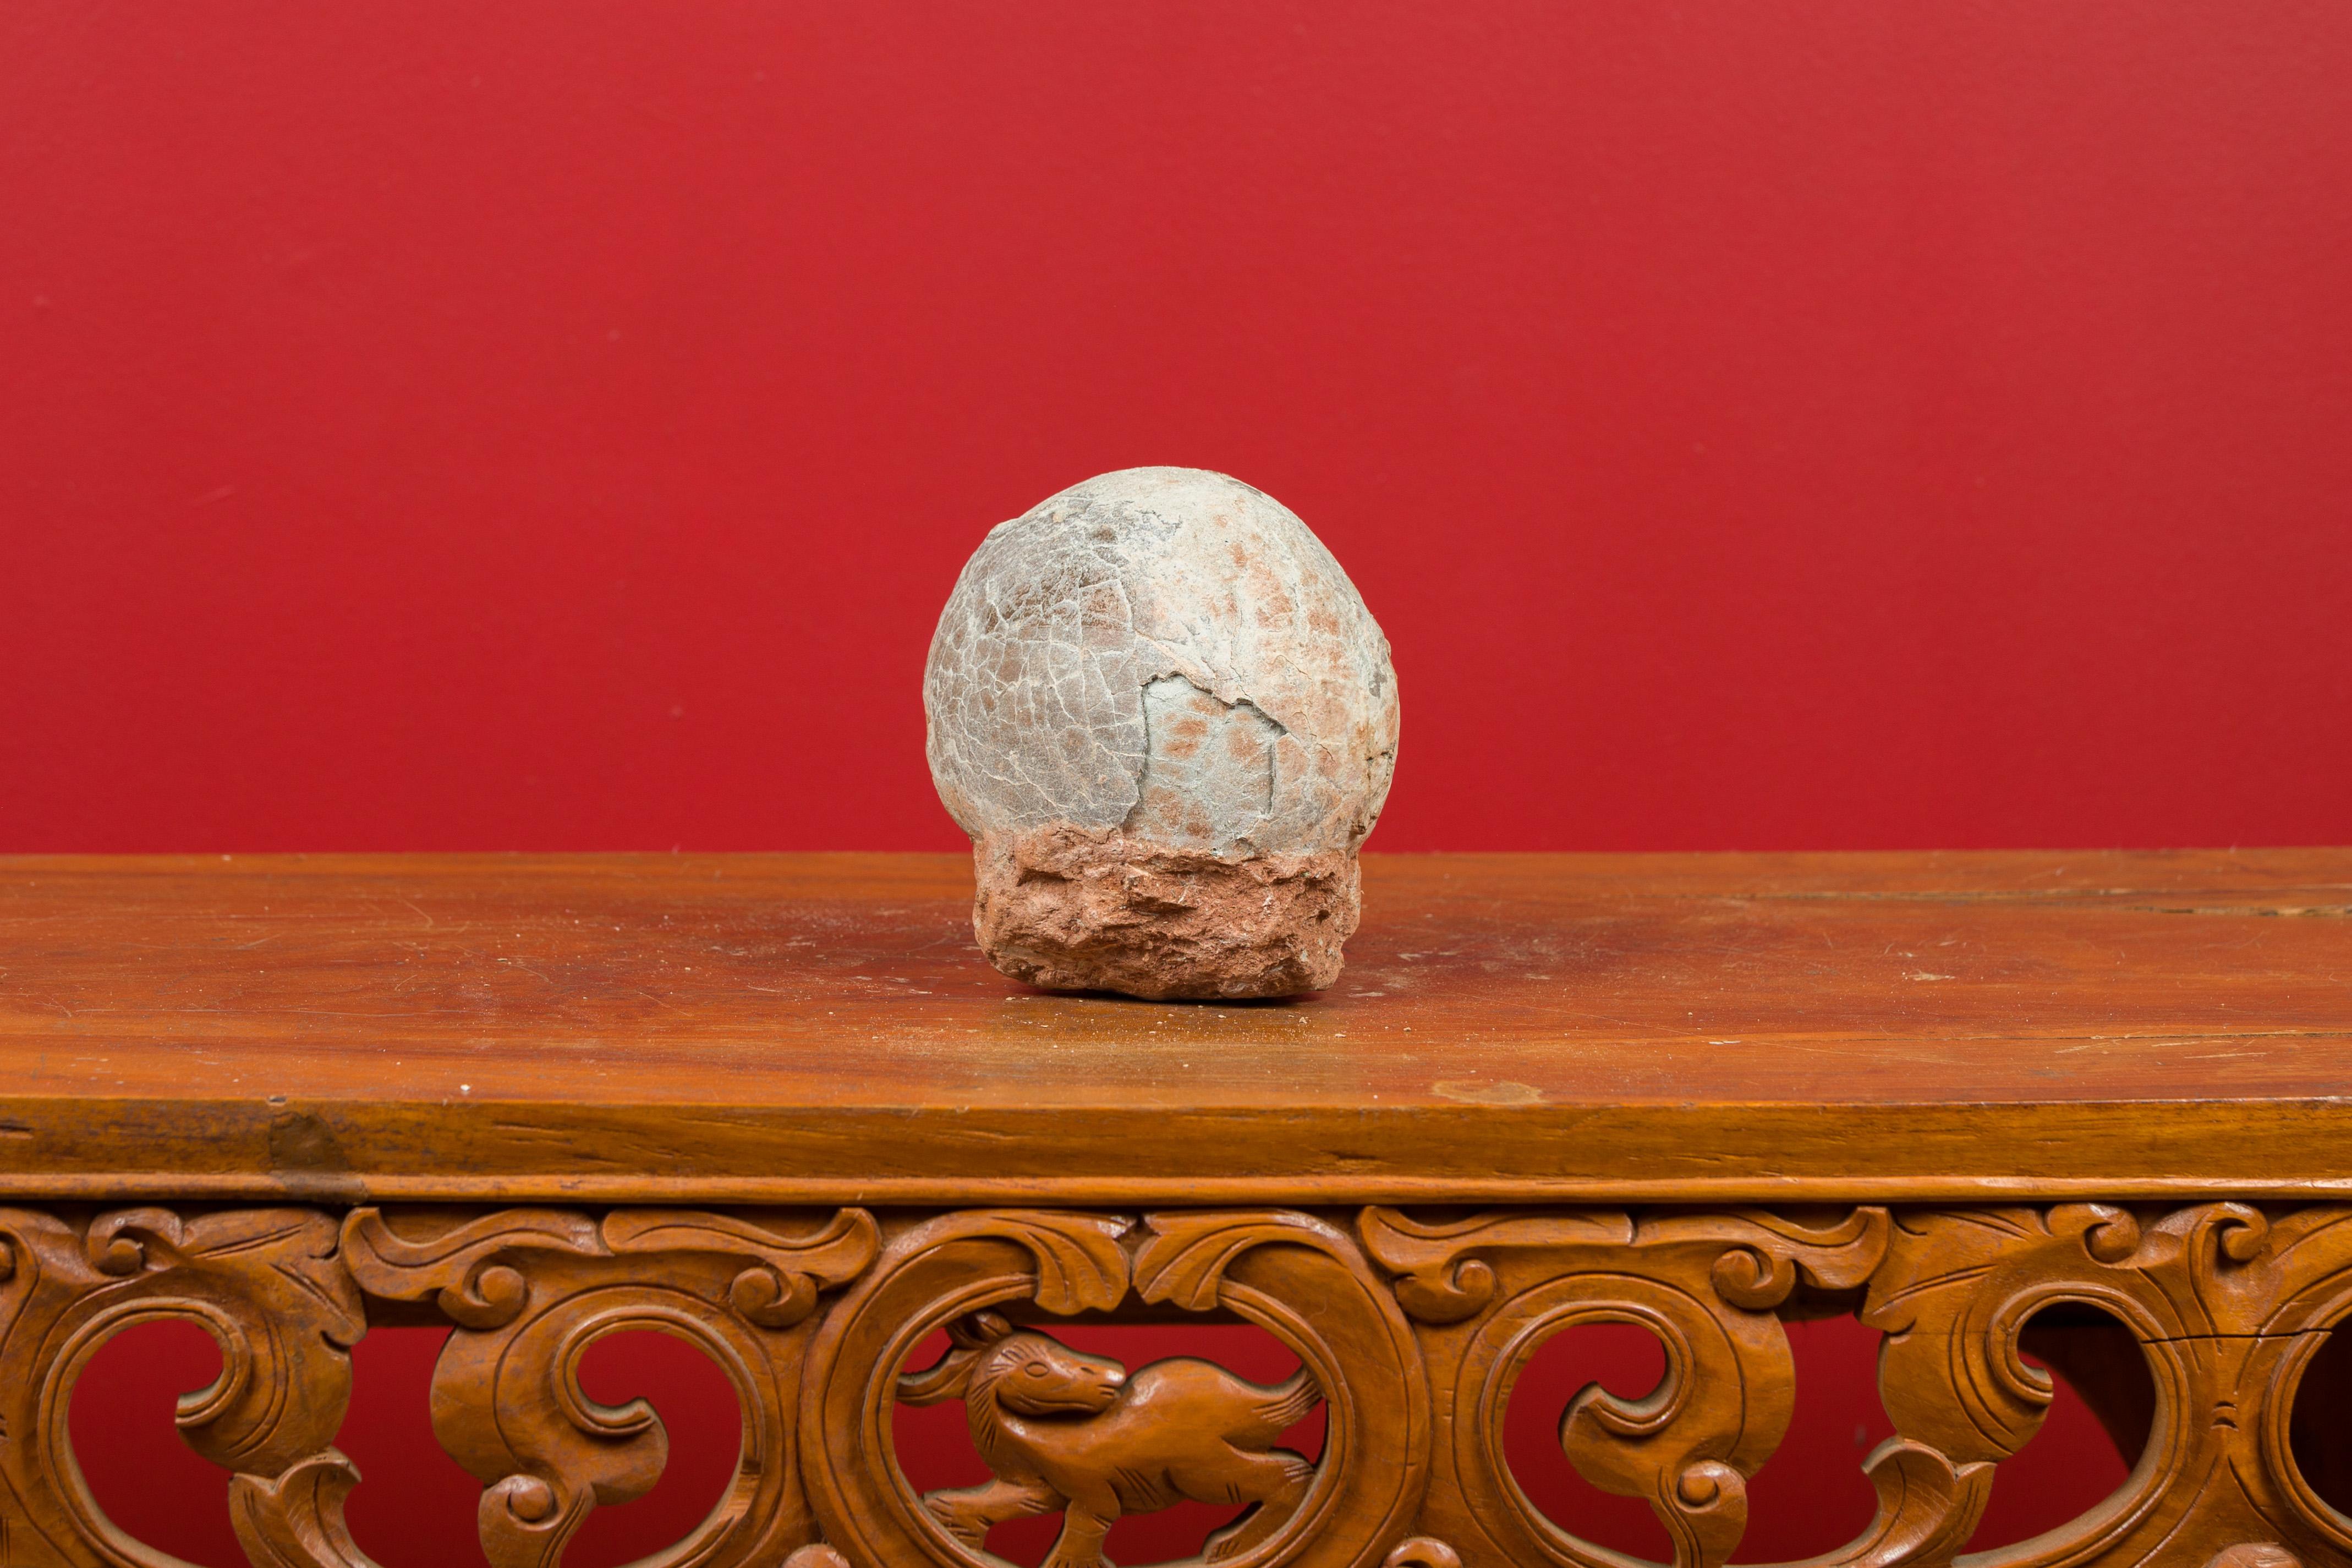 A Chinese petrified dinosaur egg. Boasting a nicely weathered appearance easily explained by its tremendous age, this petrified dinosaur egg will make for an excellent gift idea! With its ovoid shape and cracked surface, this Chinese prehistoric